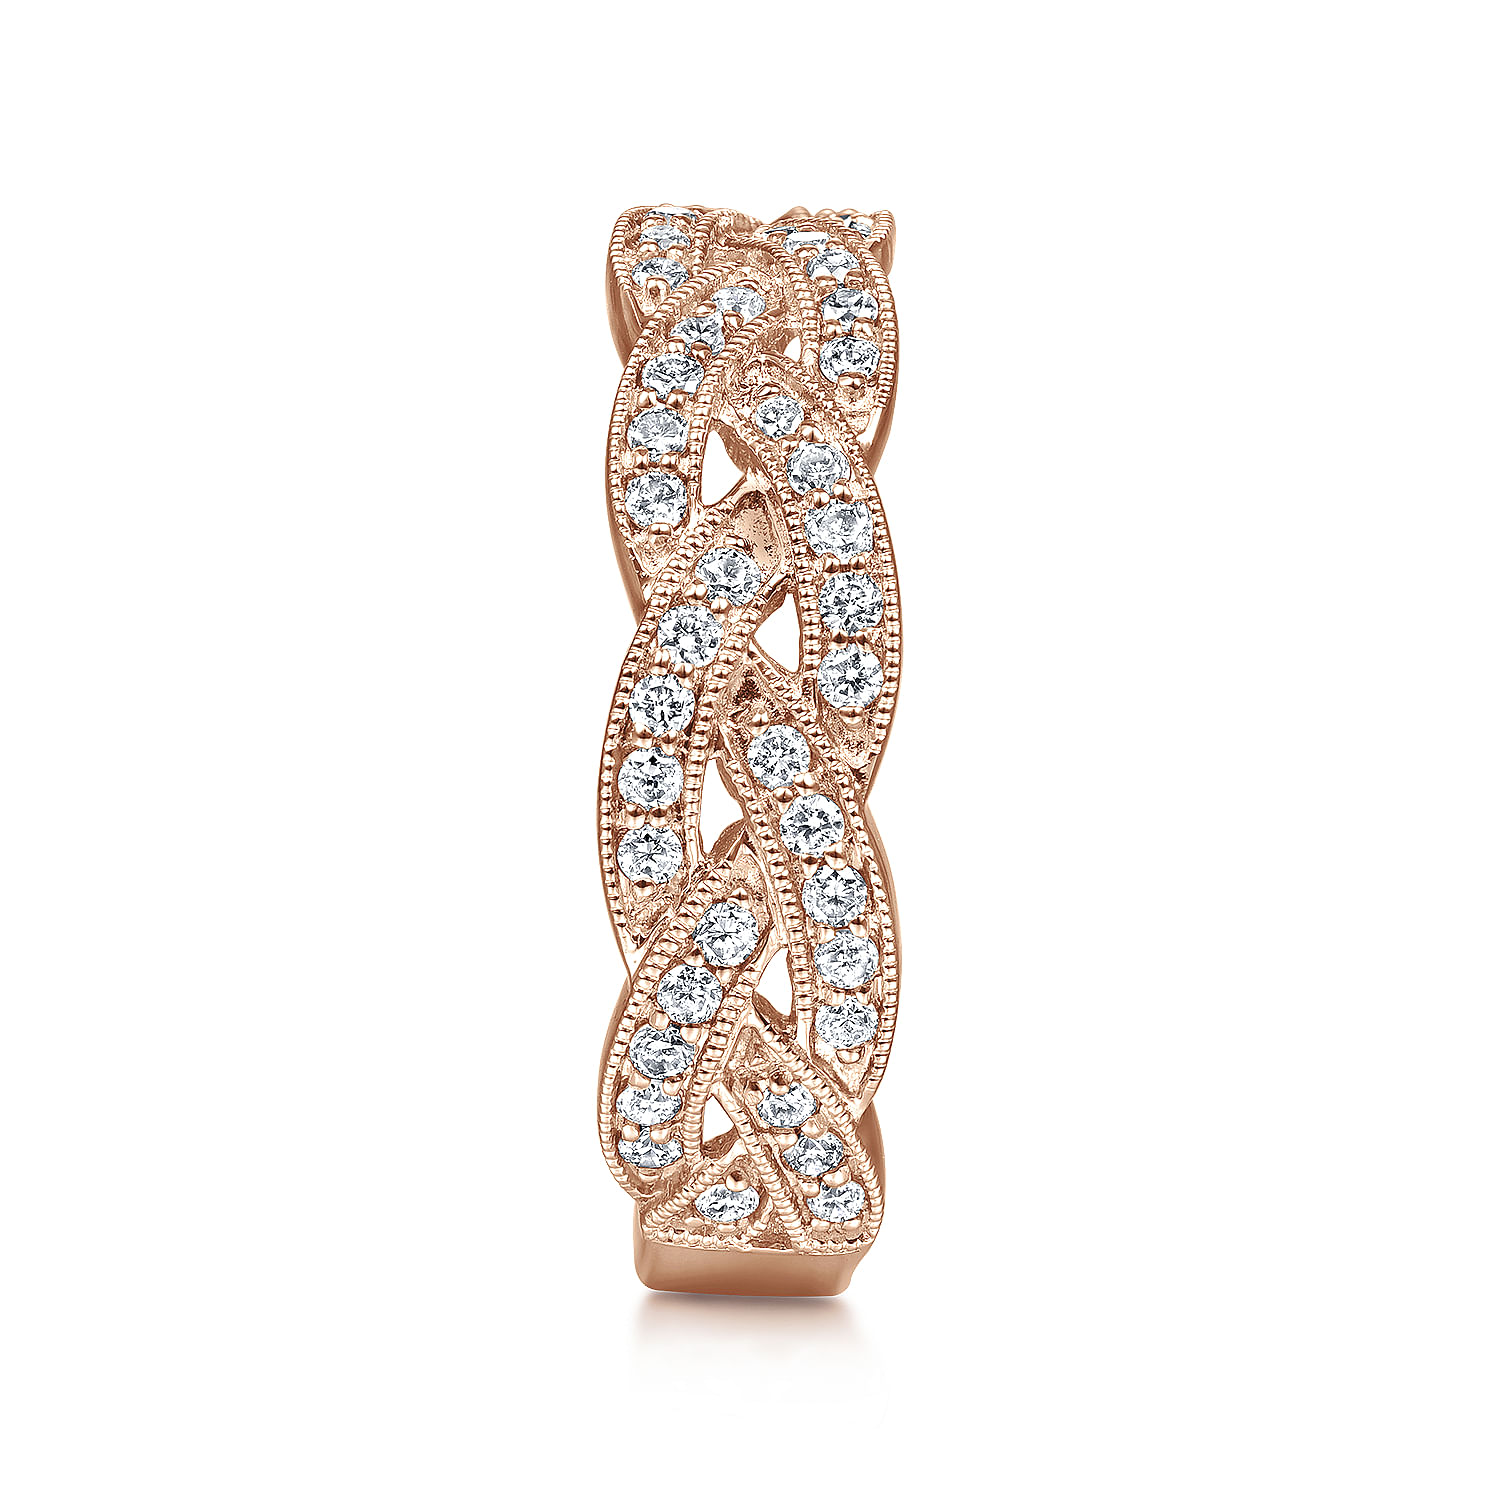 14K Rose Gold Braided Diamond Stackable Ring